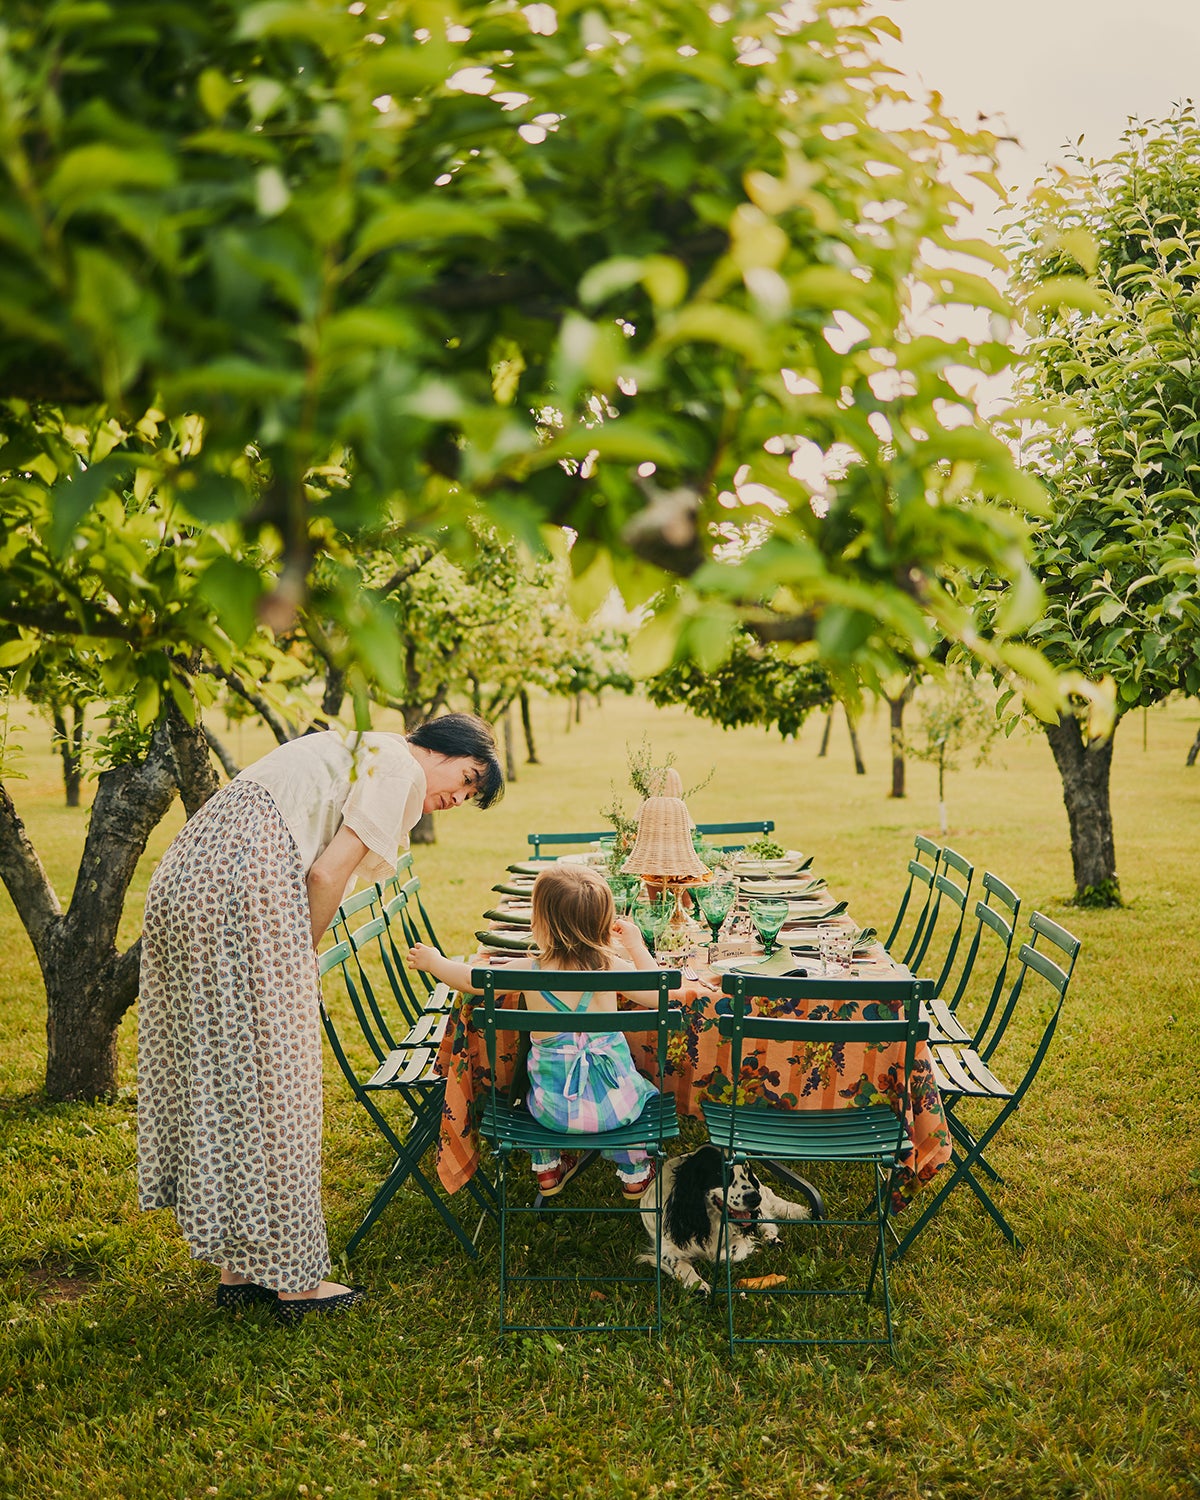 Woman and child at table outdoors